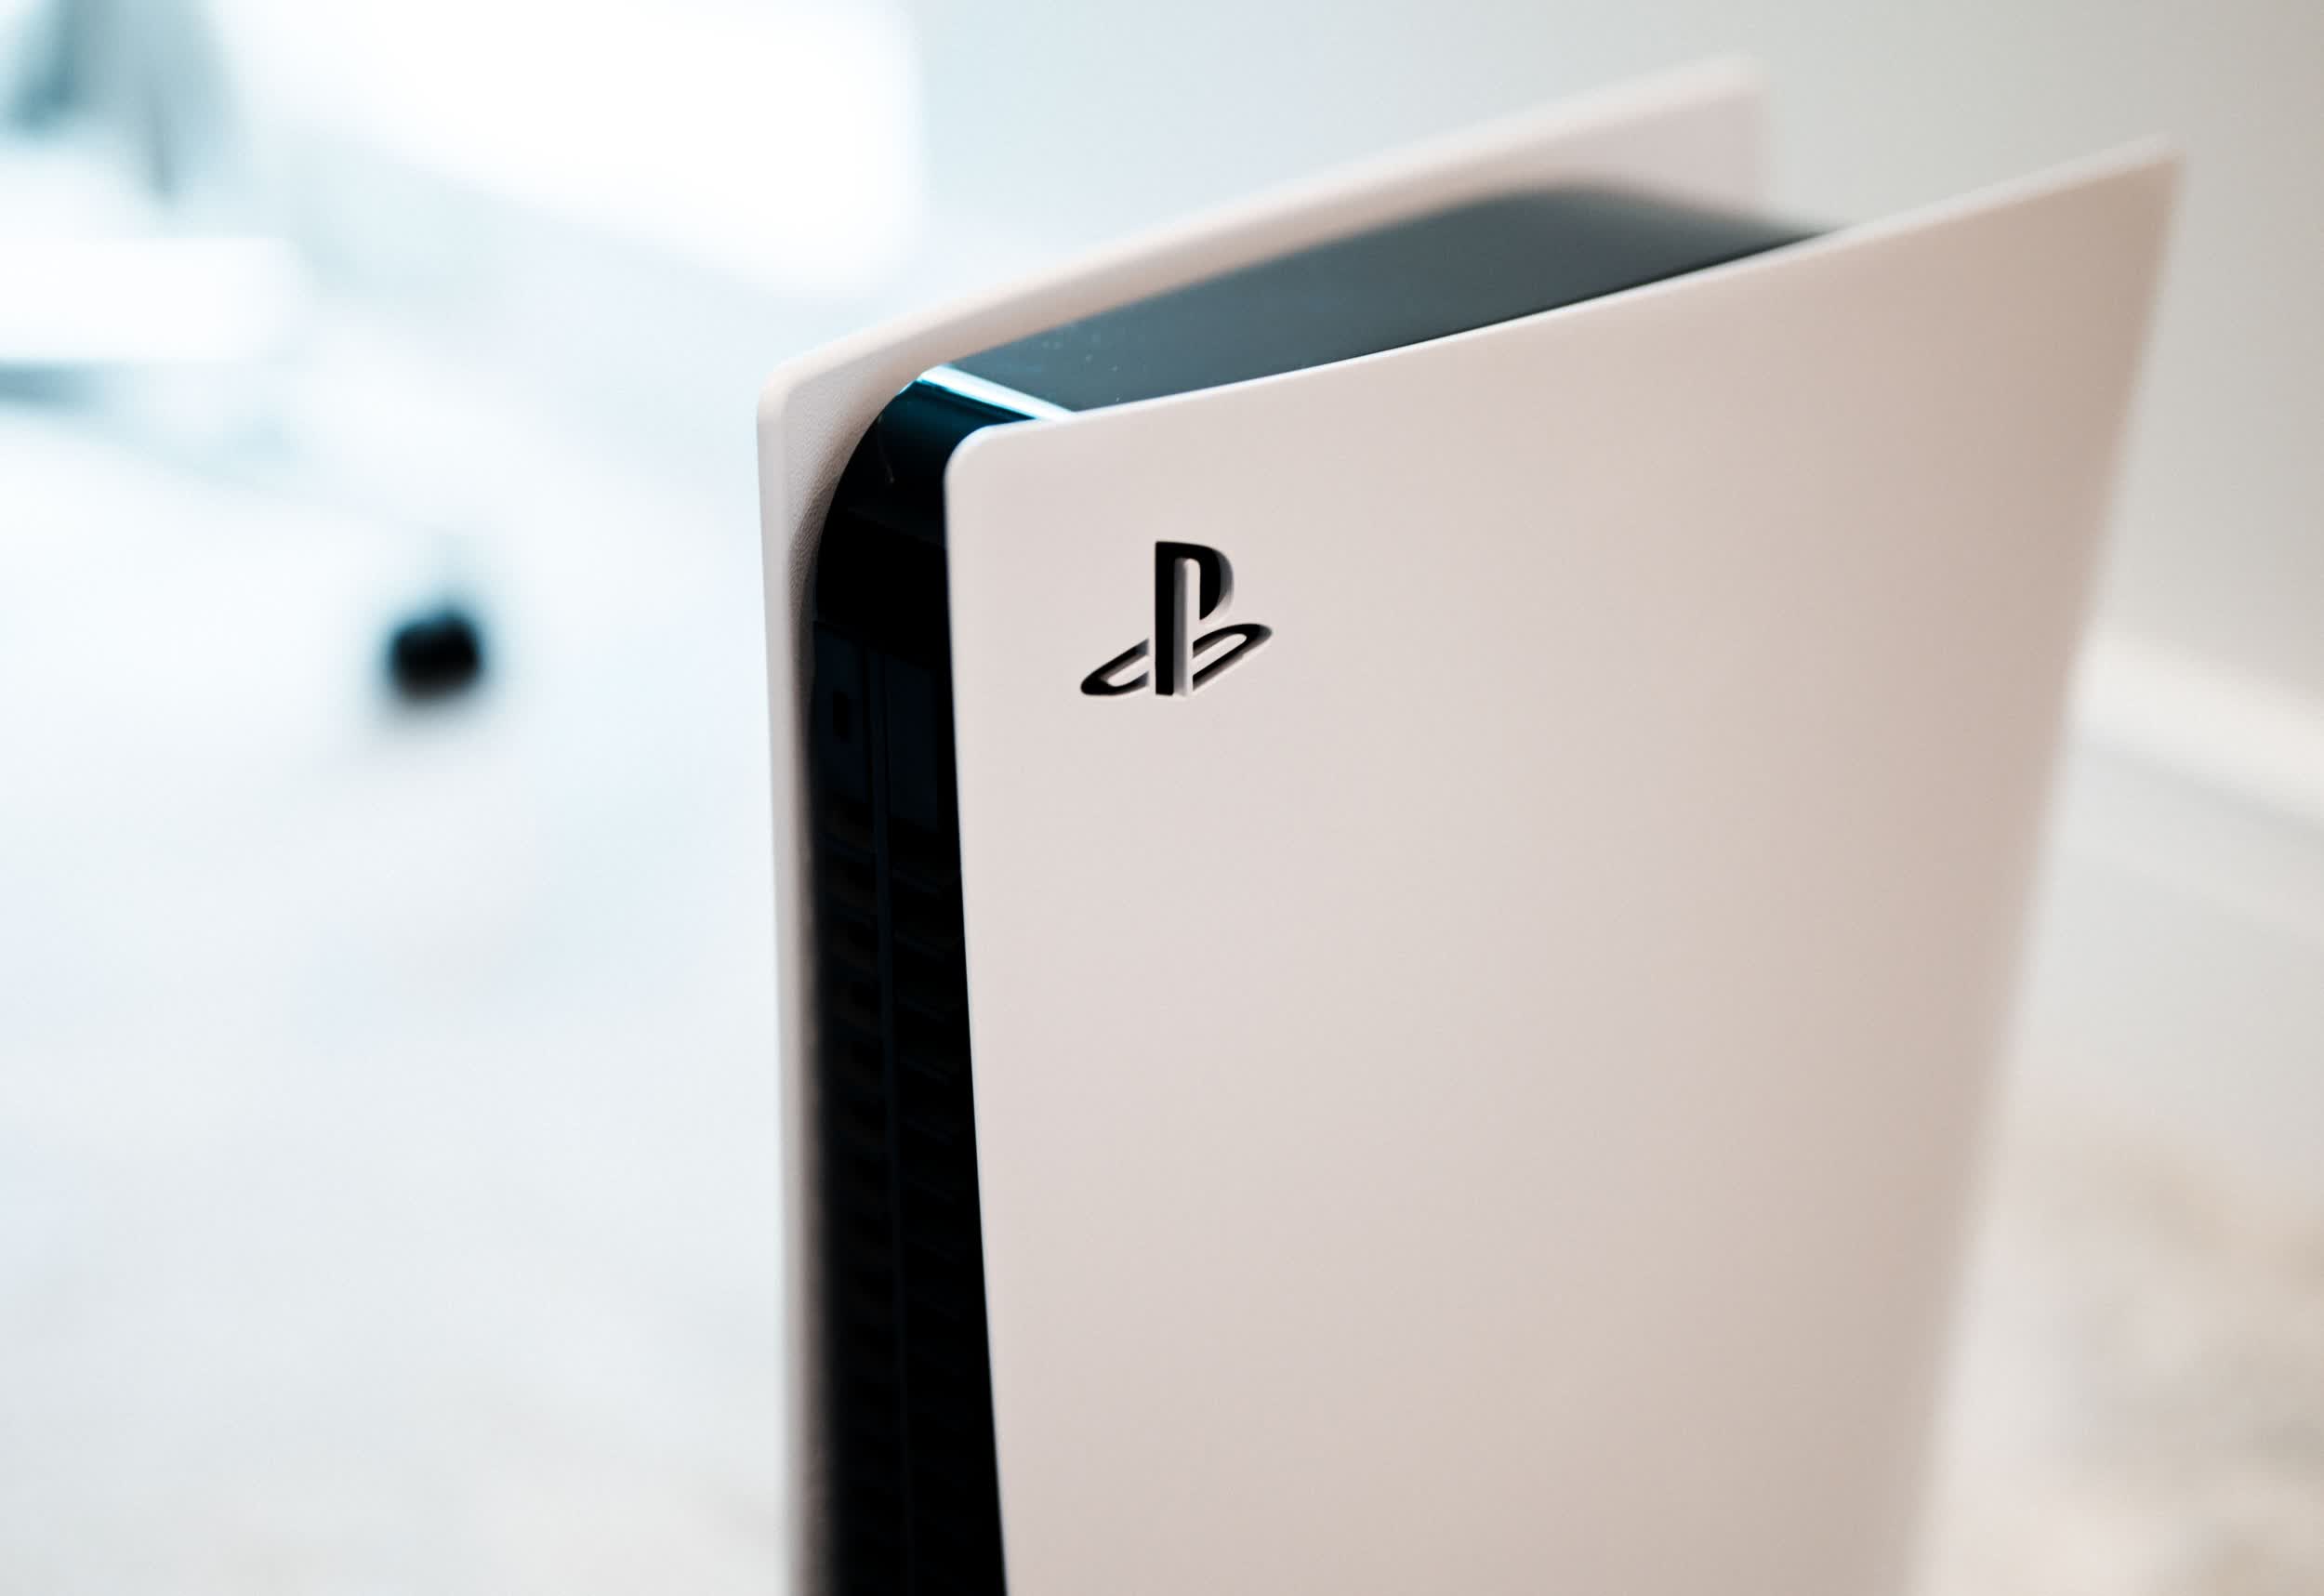 PlayStation 5 beta system update adds 1440p support, Gamelists, social features and more